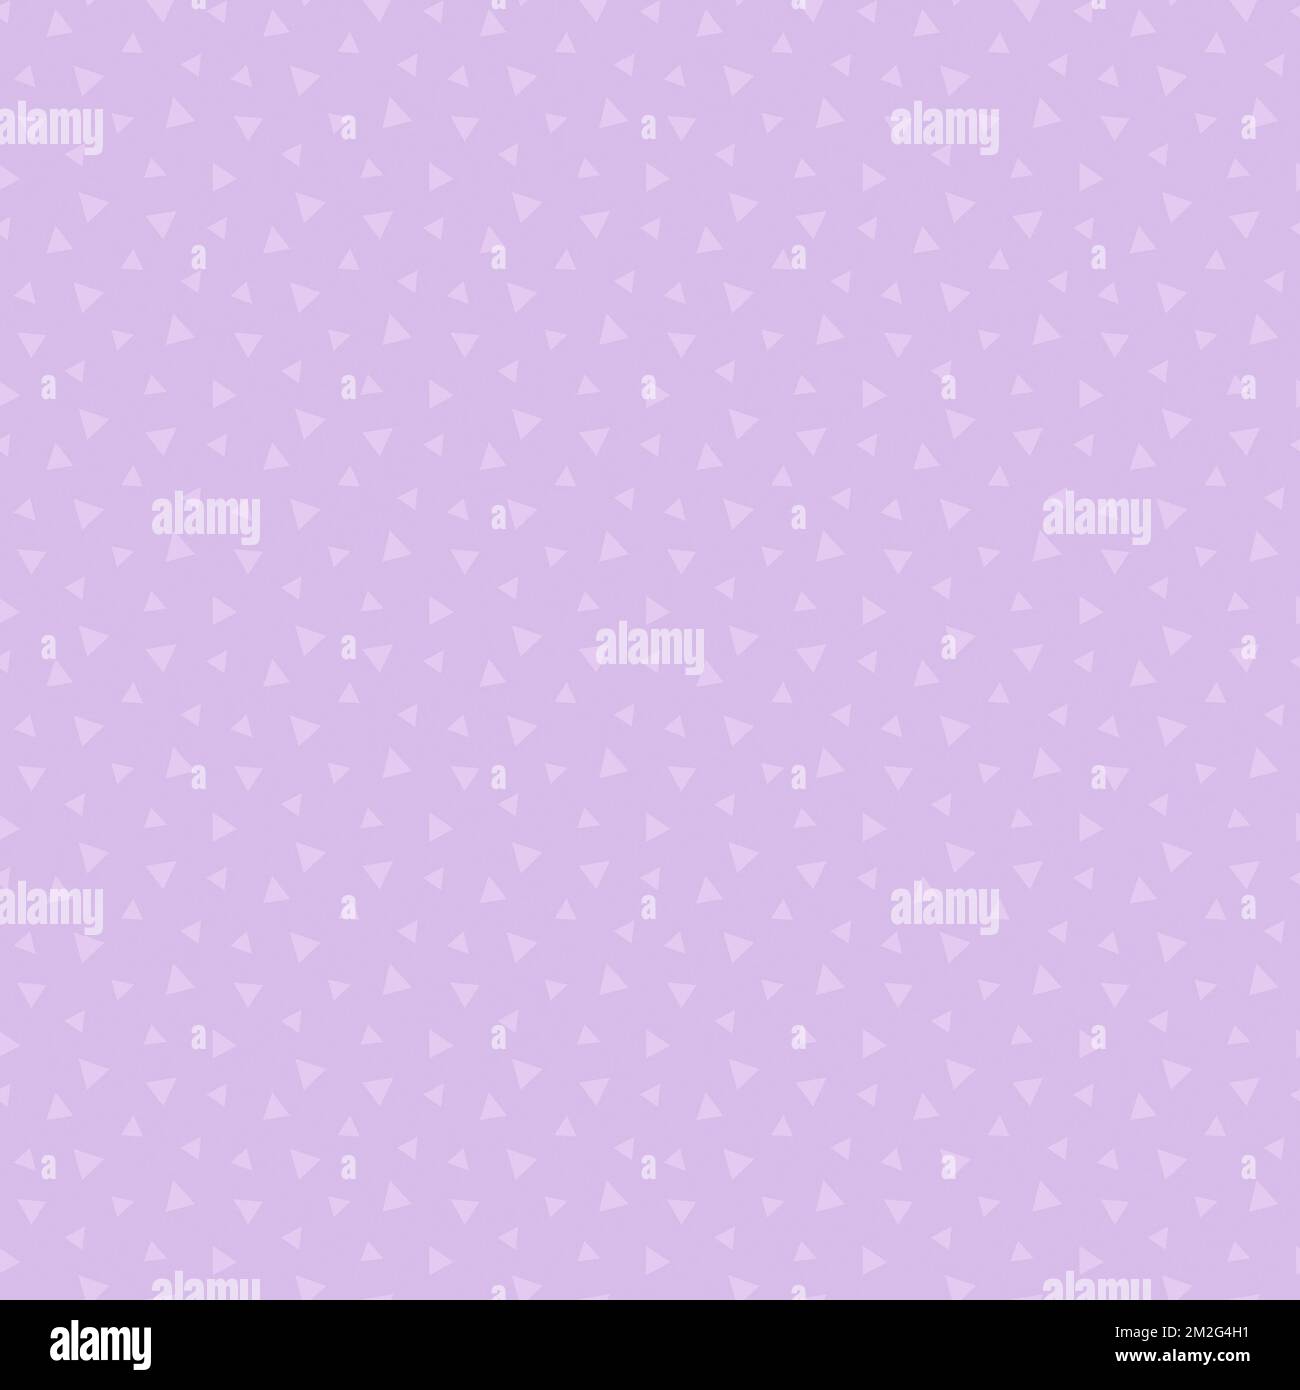 Seamless random pattern of different sized light pink triangles on pinkish purple background. Abstract full frame graphic design of triangle shapes. Stock Photo